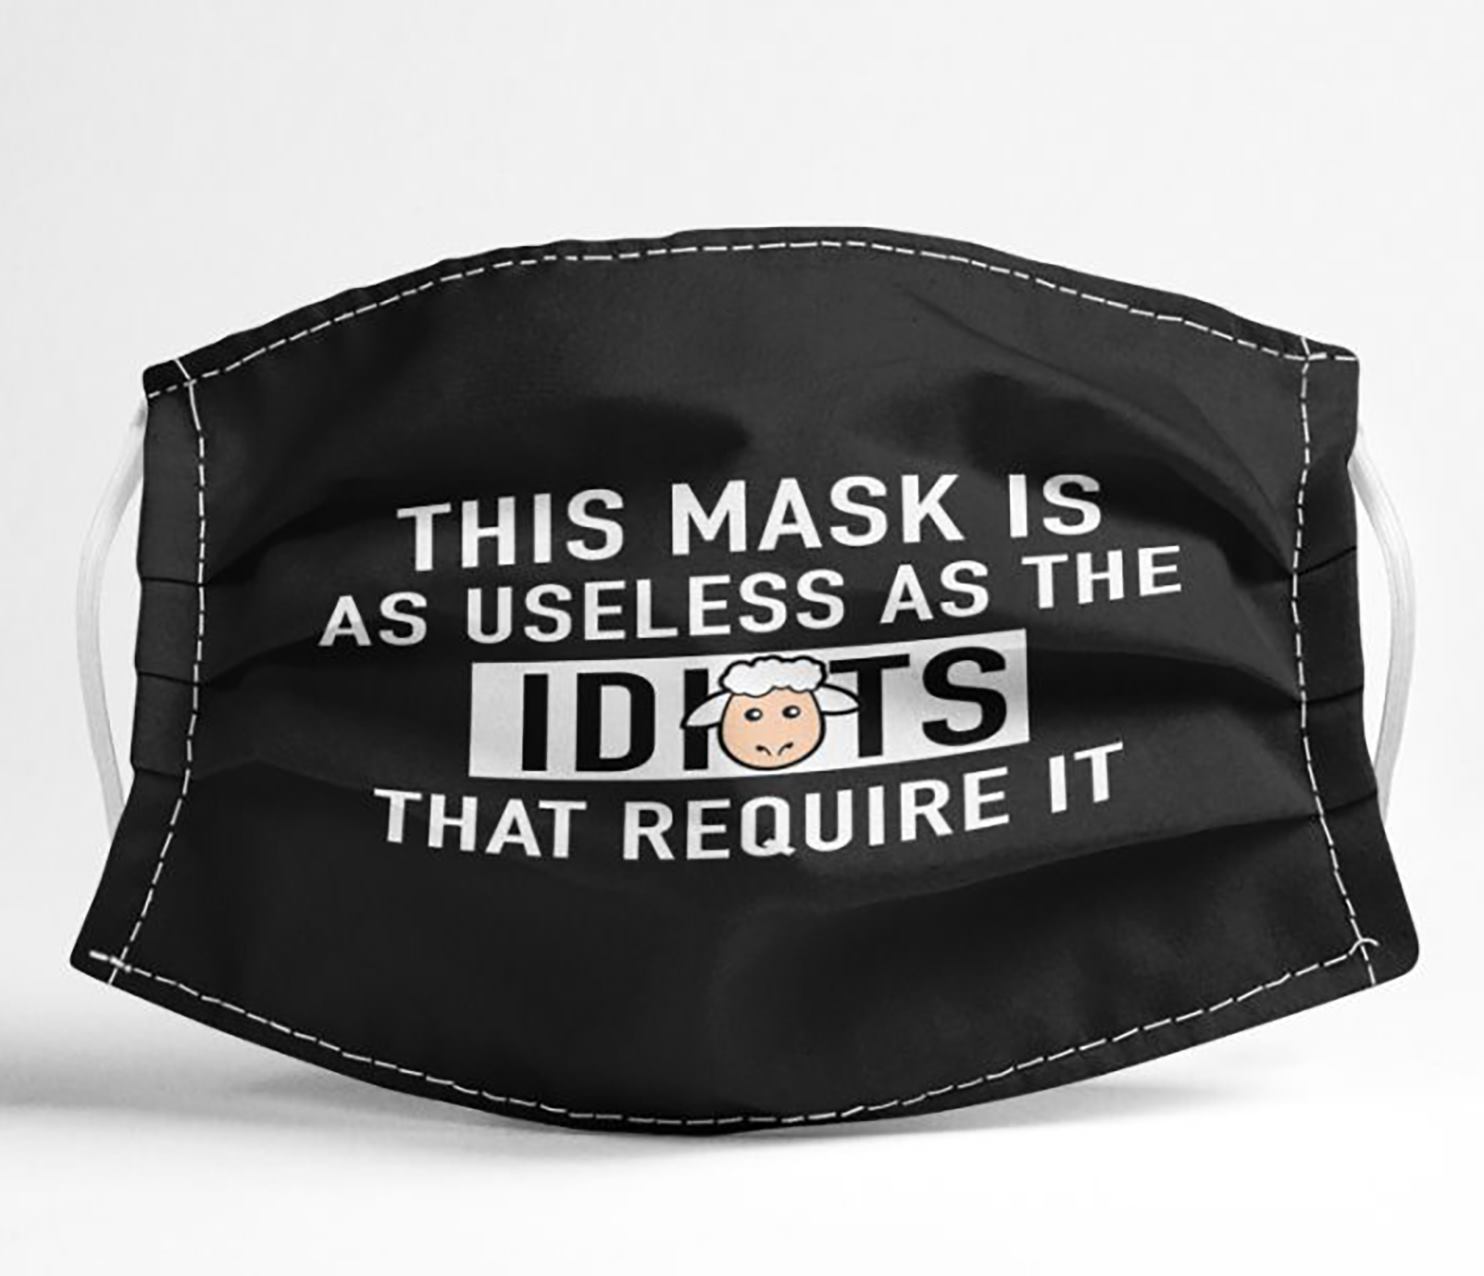 FREE shipping Sheep idiot useless require mask, This mask is as 